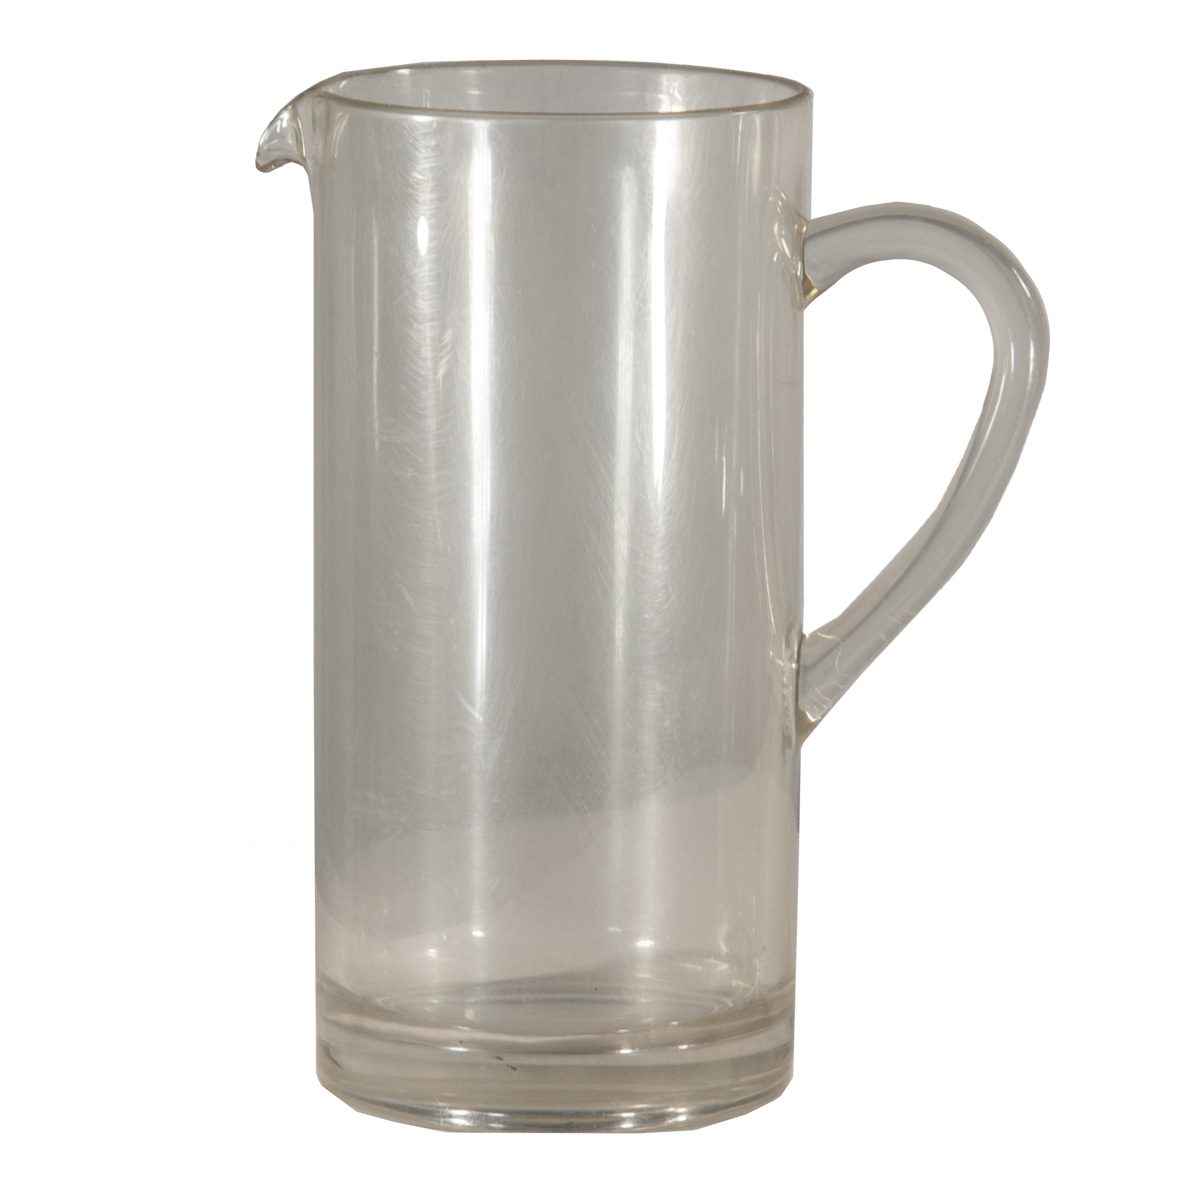 https://www.celebrationspartyrentals.com/wp-content/uploads/2015/05/New-Style-Acrylic-Water-Pitcher.jpg